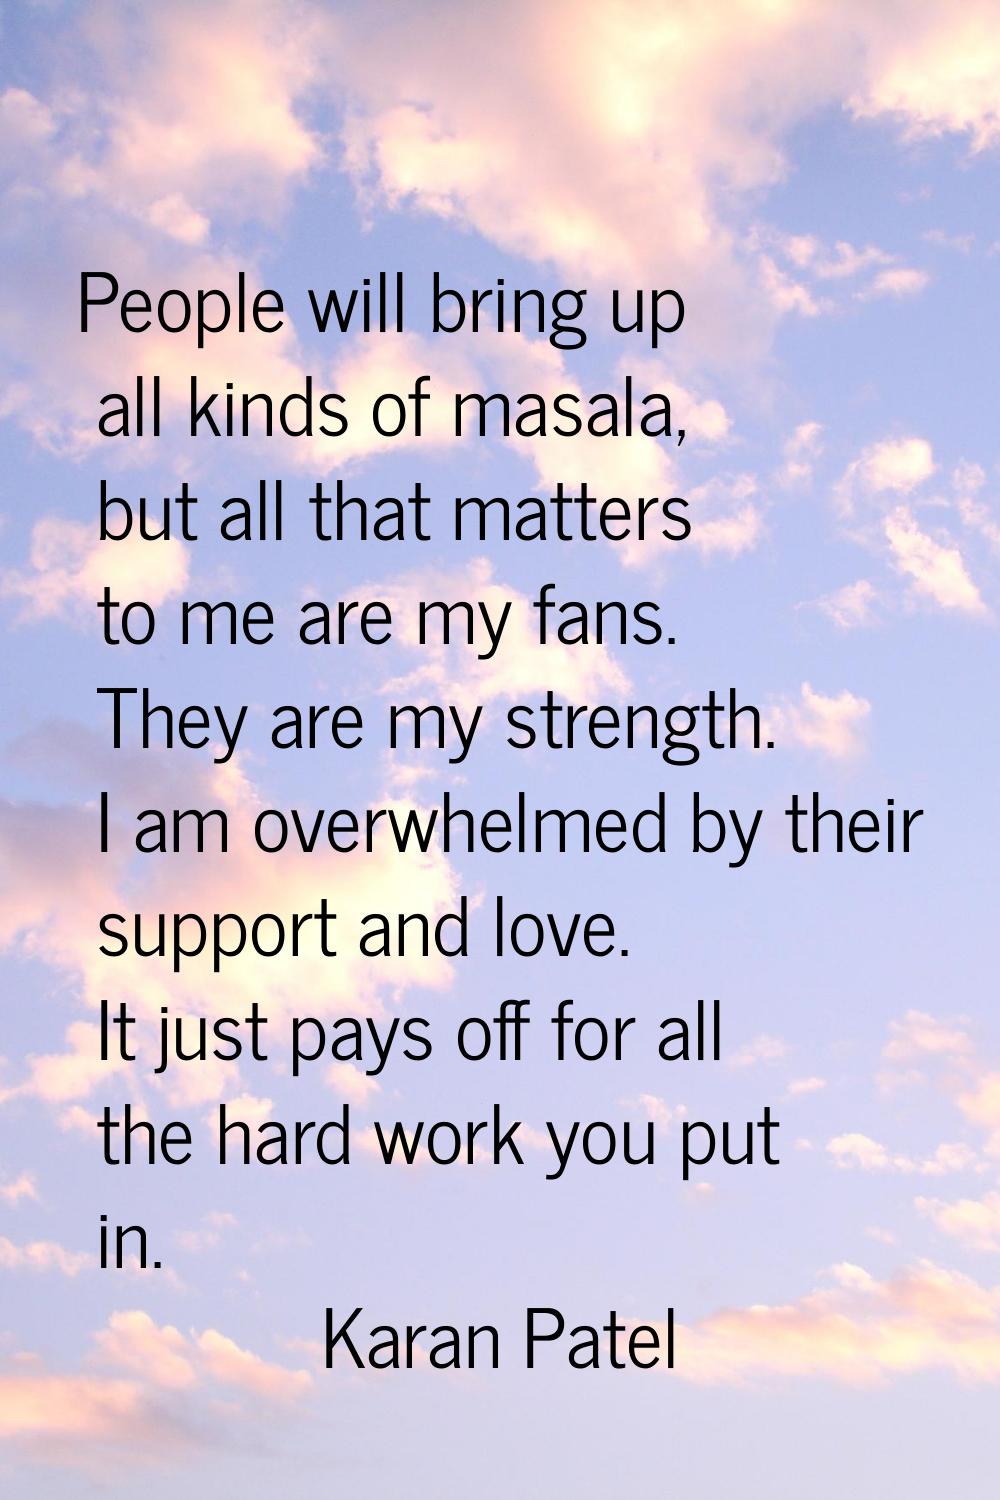 People will bring up all kinds of masala, but all that matters to me are my fans. They are my stren